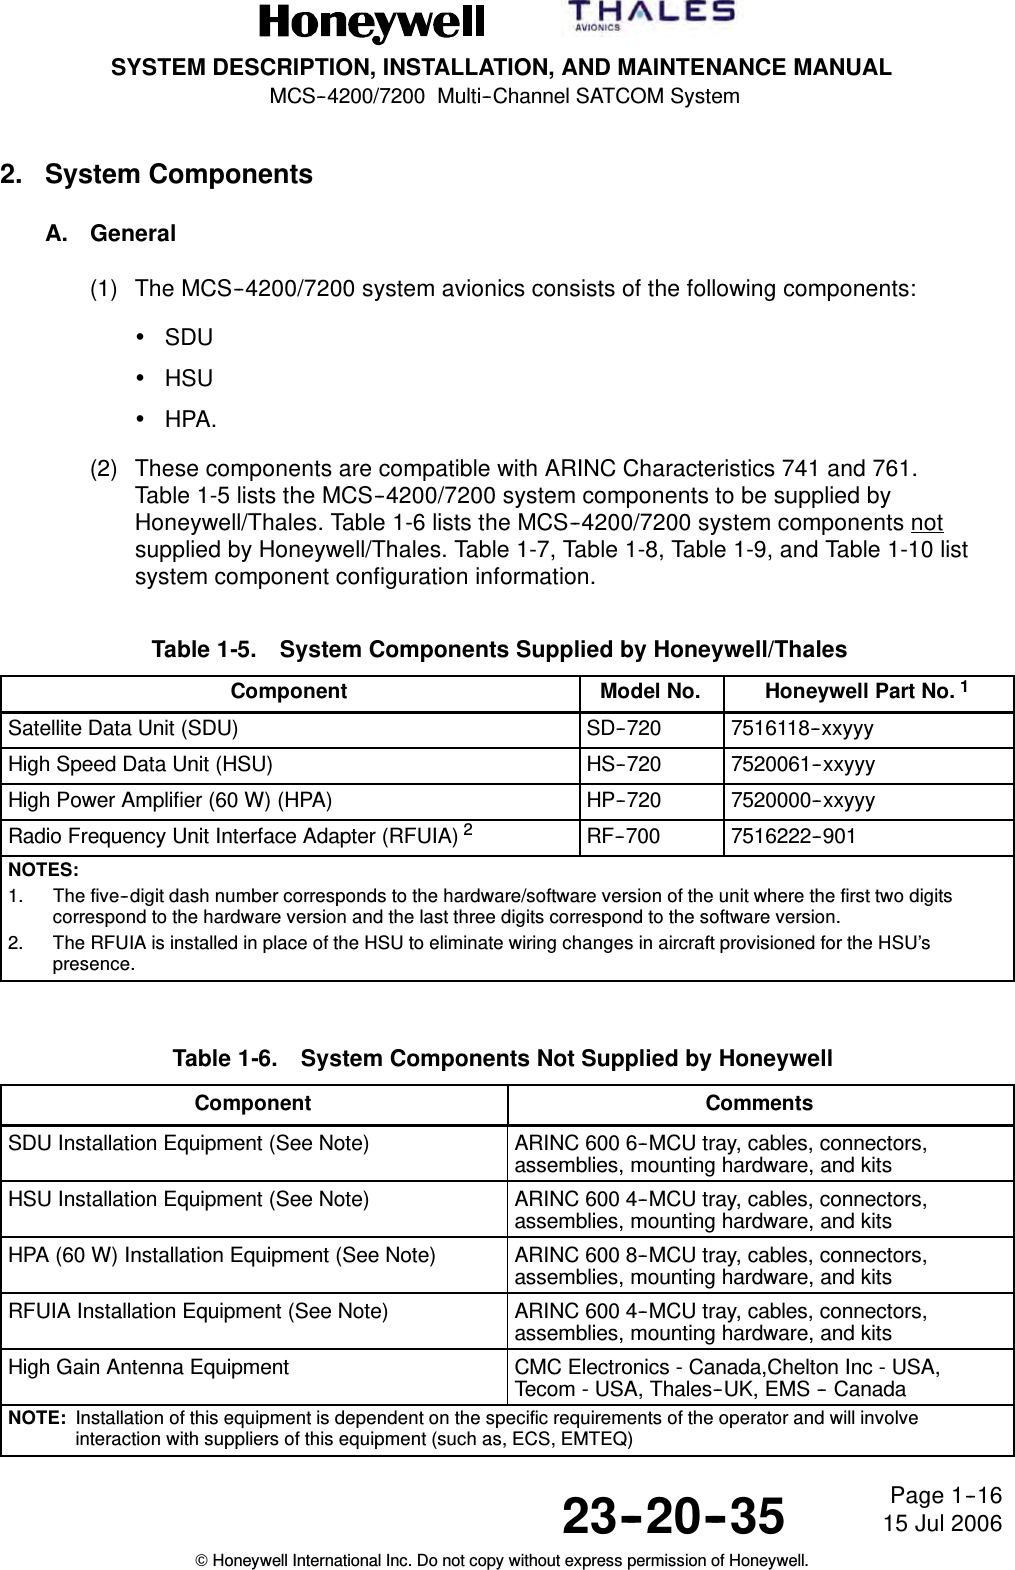 SYSTEM DESCRIPTION, INSTALLATION, AND MAINTENANCE MANUALMCS--4200/7200 Multi--Channel SATCOM System23--20--35 15 Jul 2006Honeywell International Inc. Do not copy without express permission of Honeywell.Page 1--162. System ComponentsA. General(1) The MCS--4200/7200 system avionics consists of the following components:•SDU•HSU•HPA.(2) These components are compatible with ARINC Characteristics 741 and 761.Table 1-5 lists the MCS--4200/7200 system components to be supplied byHoneywell/Thales. Table 1-6 lists the MCS--4200/7200 system components notsupplied by Honeywell/Thales. Table 1-7, Table 1-8, Table 1-9, and Table 1-10 listsystem component configuration information.Table 1-5. System Components Supplied by Honeywell/ThalesComponent Model No. Honeywell Part No. 1Satellite Data Unit (SDU) SD--720 7516118--xxyyyHigh Speed Data Unit (HSU) HS--720 7520061--xxyyyHigh Power Amplifier (60 W) (HPA) HP--720 7520000--xxyyyRadio Frequency Unit Interface Adapter (RFUIA) 2RF--700 7516222--901NOTES:1. The five--digit dash number corresponds to the hardware/software version of the unit where the first two digitscorrespond to the hardware version and the last three digits correspond to the software version.2. The RFUIA is installed in place of the HSU to eliminate wiring changes in aircraft provisioned for the HSU’spresence.Table 1-6. System Components Not Supplied by HoneywellComponent CommentsSDU Installation Equipment (See Note) ARINC 600 6--MCU tray, cables, connectors,assemblies, mounting hardware, and kitsHSU Installation Equipment (See Note) ARINC 600 4--MCU tray, cables, connectors,assemblies, mounting hardware, and kitsHPA (60 W) Installation Equipment (See Note) ARINC 600 8--MCU tray, cables, connectors,assemblies, mounting hardware, and kitsRFUIA Installation Equipment (See Note) ARINC 600 4--MCU tray, cables, connectors,assemblies, mounting hardware, and kitsHigh Gain Antenna Equipment CMC Electronics - Canada,Chelton Inc - USA,Tecom - USA, Thales--UK, EMS -- CanadaNOTE: Installation of this equipment is dependent on the specific requirements of the operator and will involveinteraction with suppliers of this equipment (such as, ECS, EMTEQ)